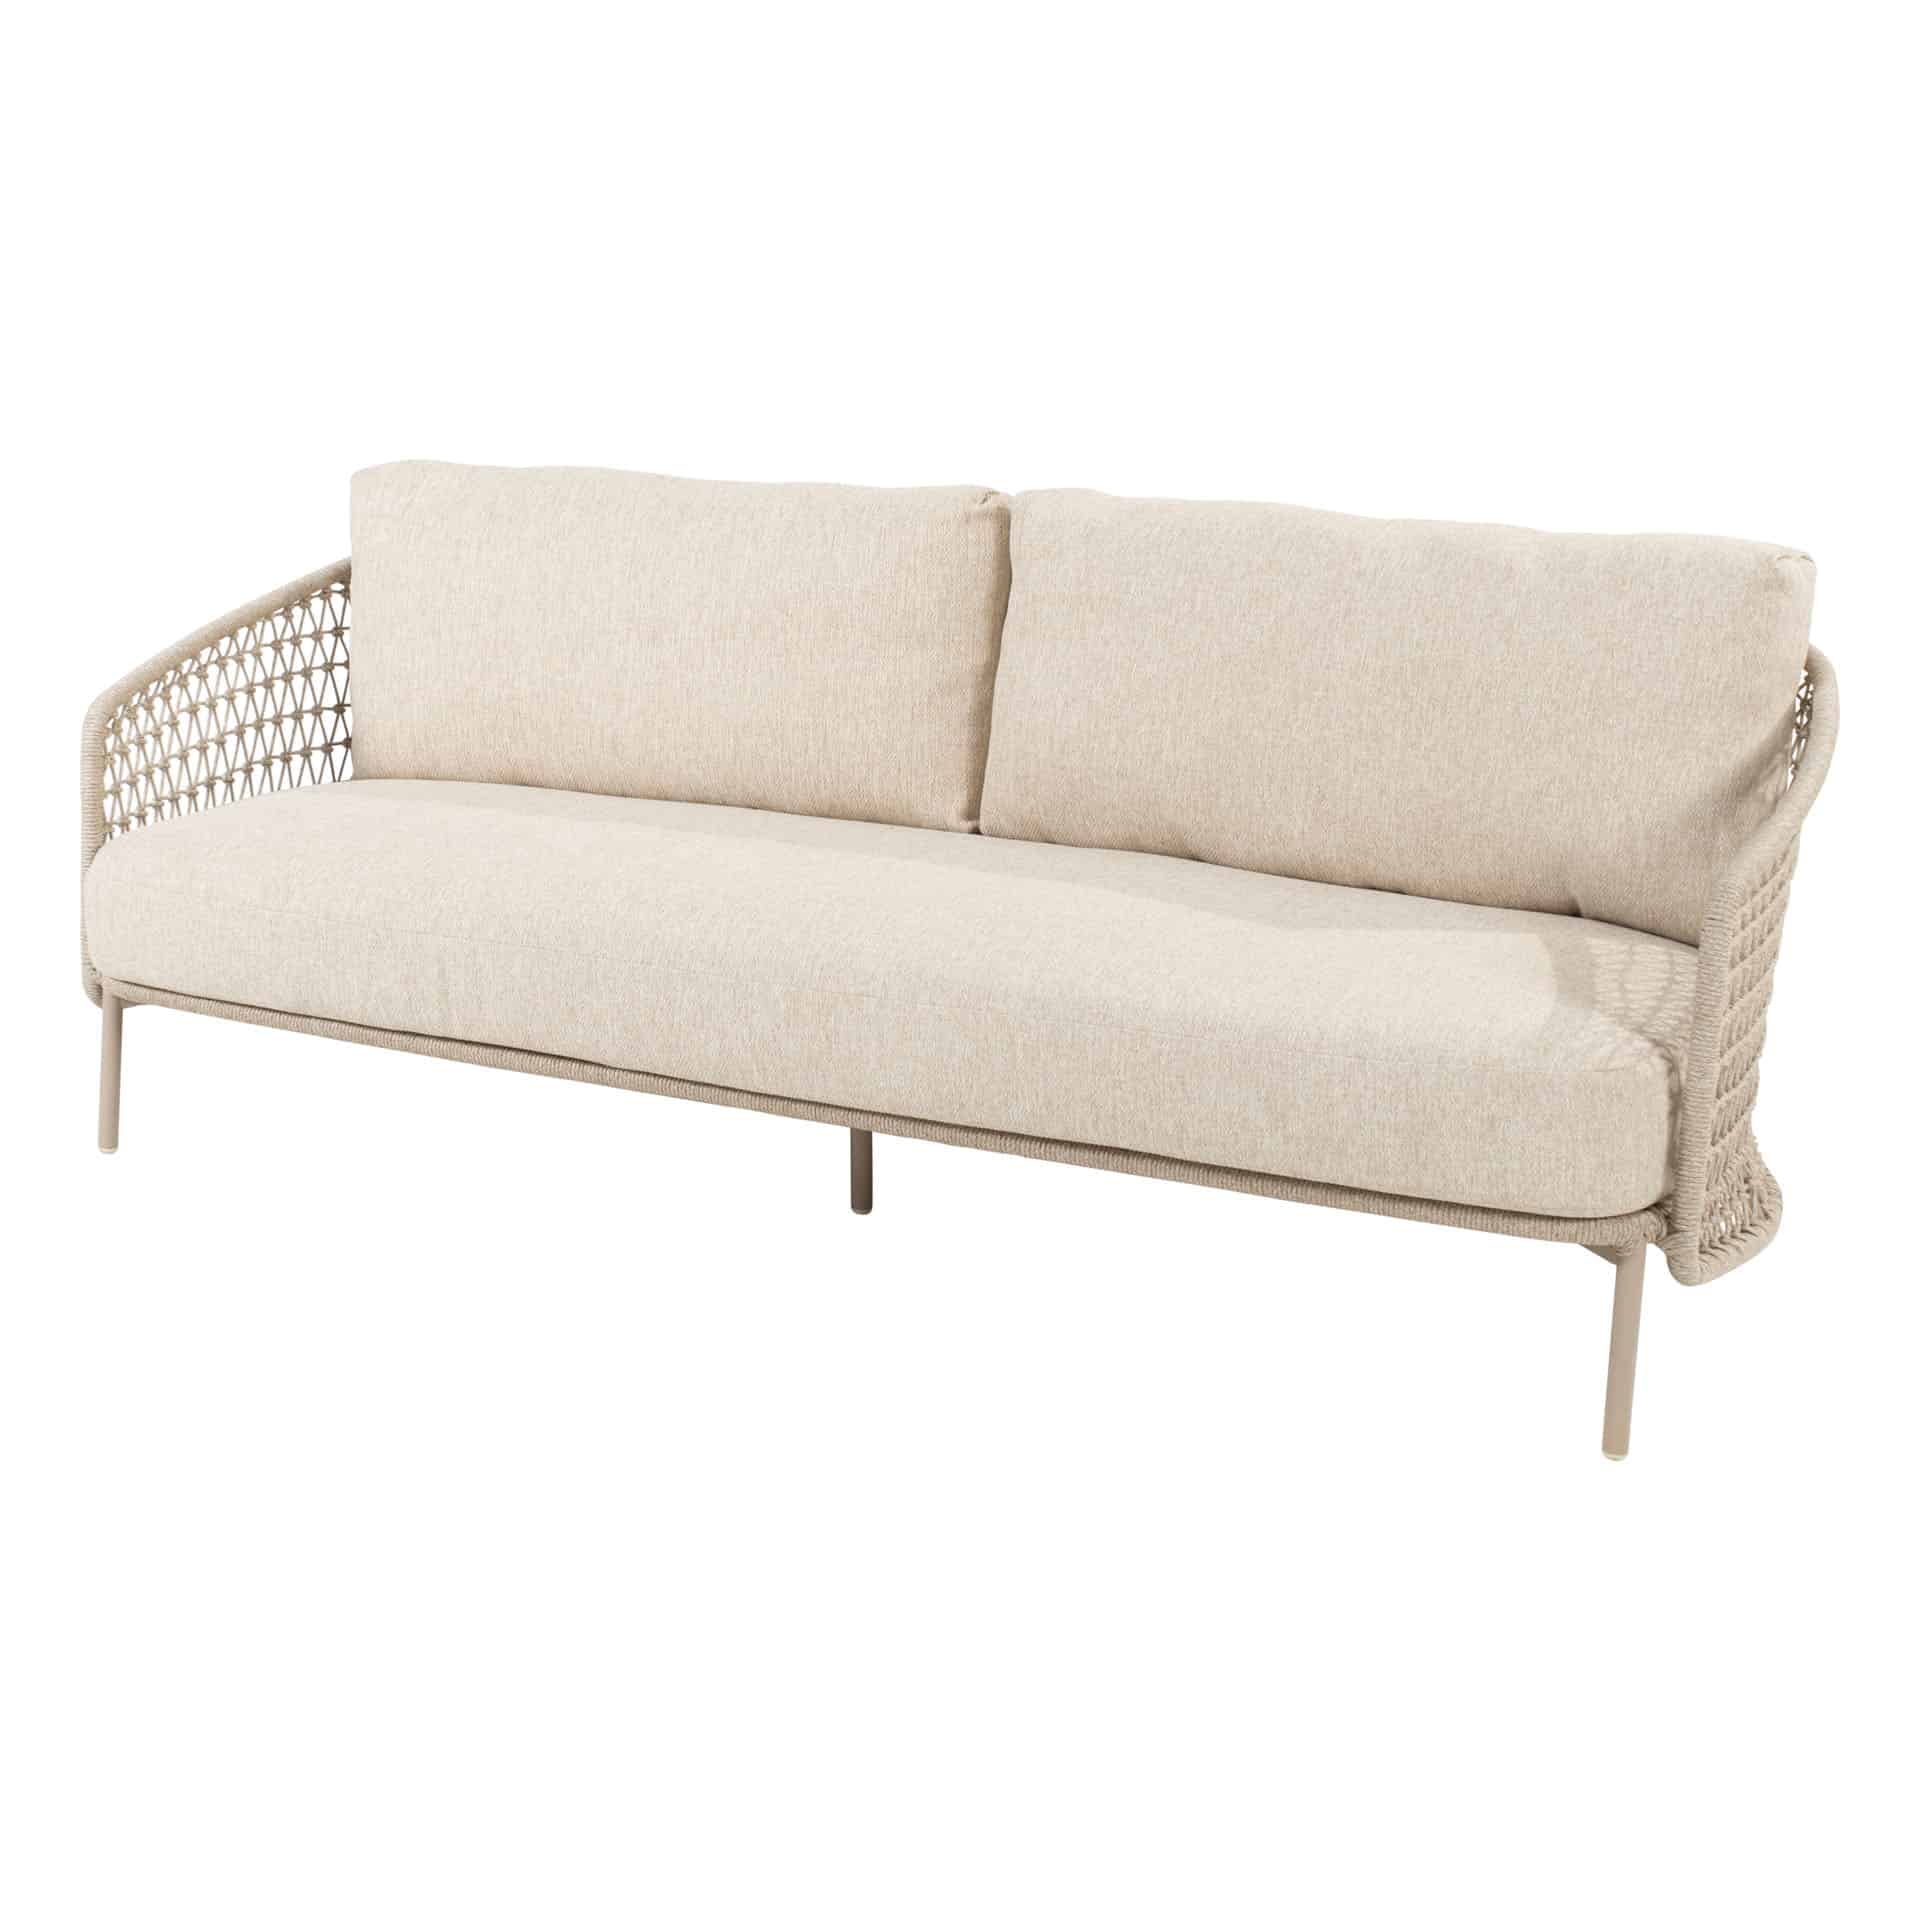 213937_-Puccini-3-seater-bench-latte-with-3-cushions-01